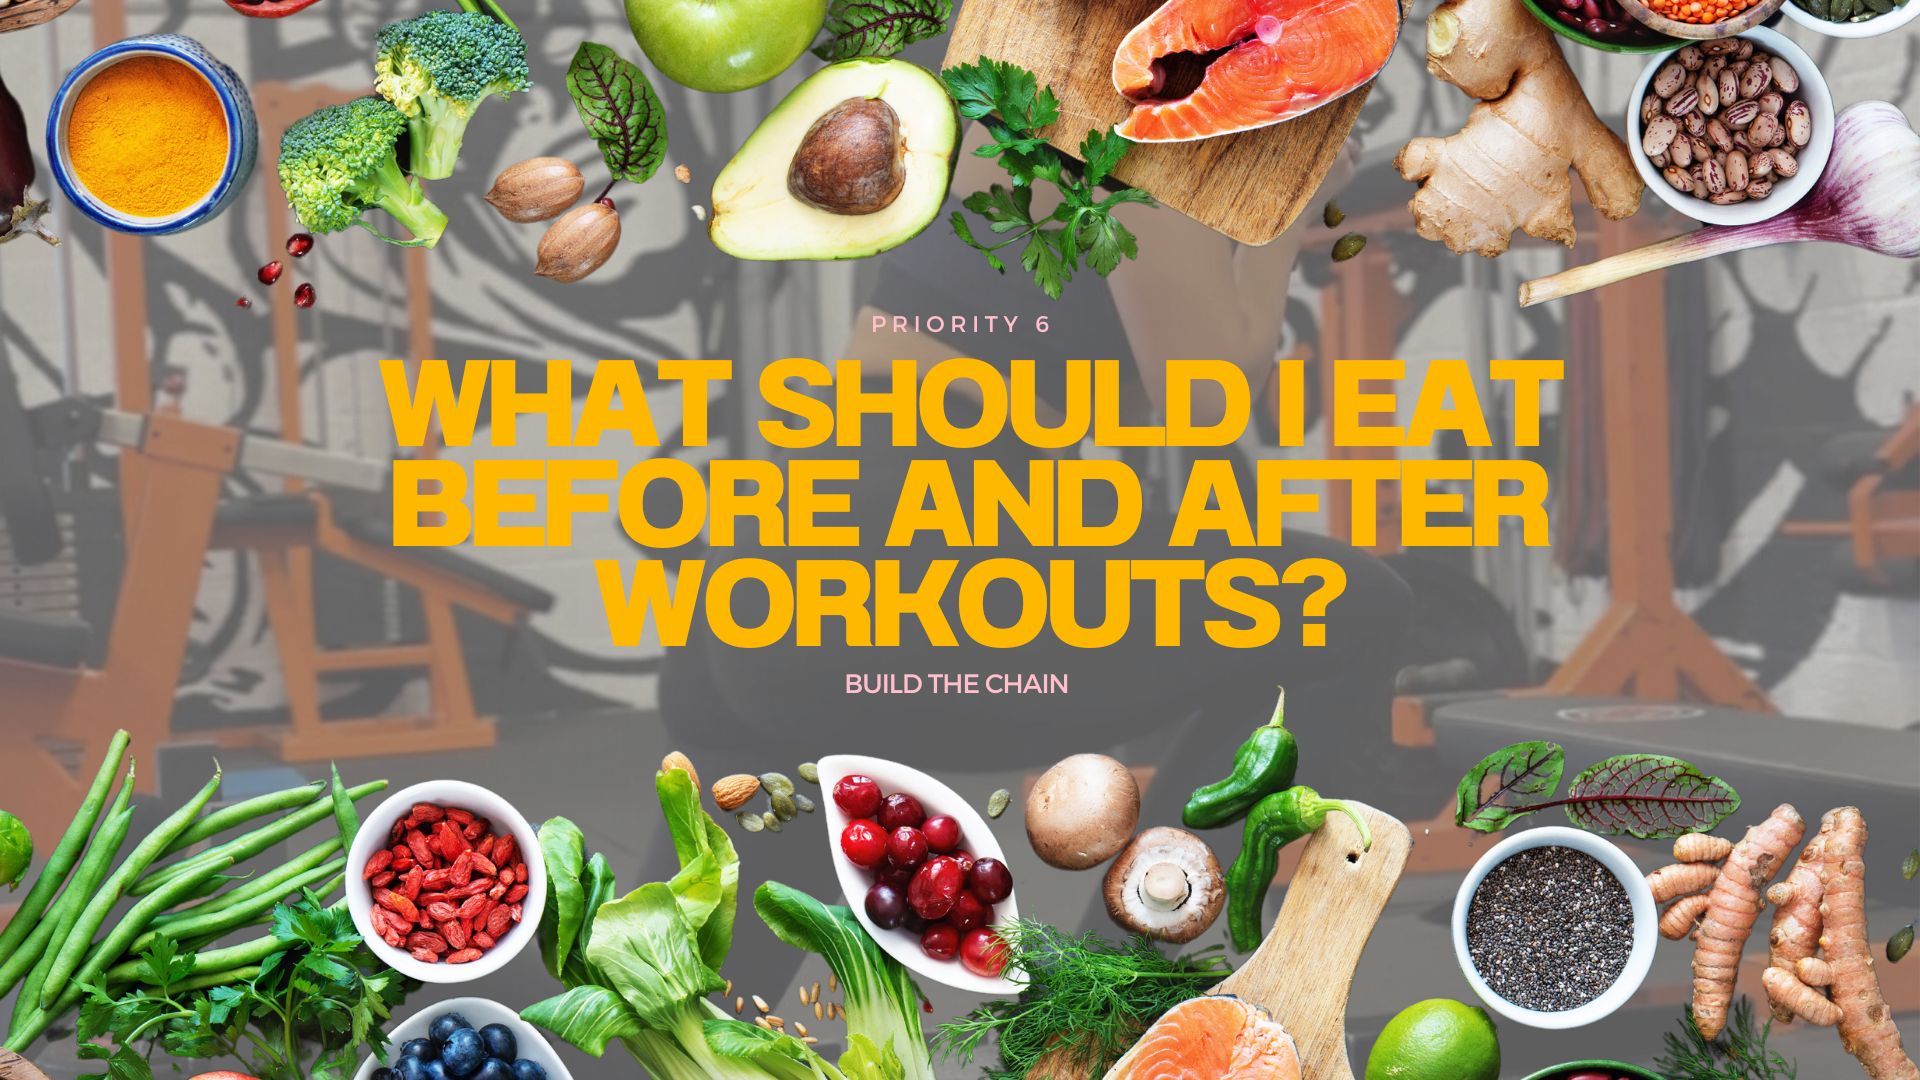 What Should I Eat Before & After Workouts?